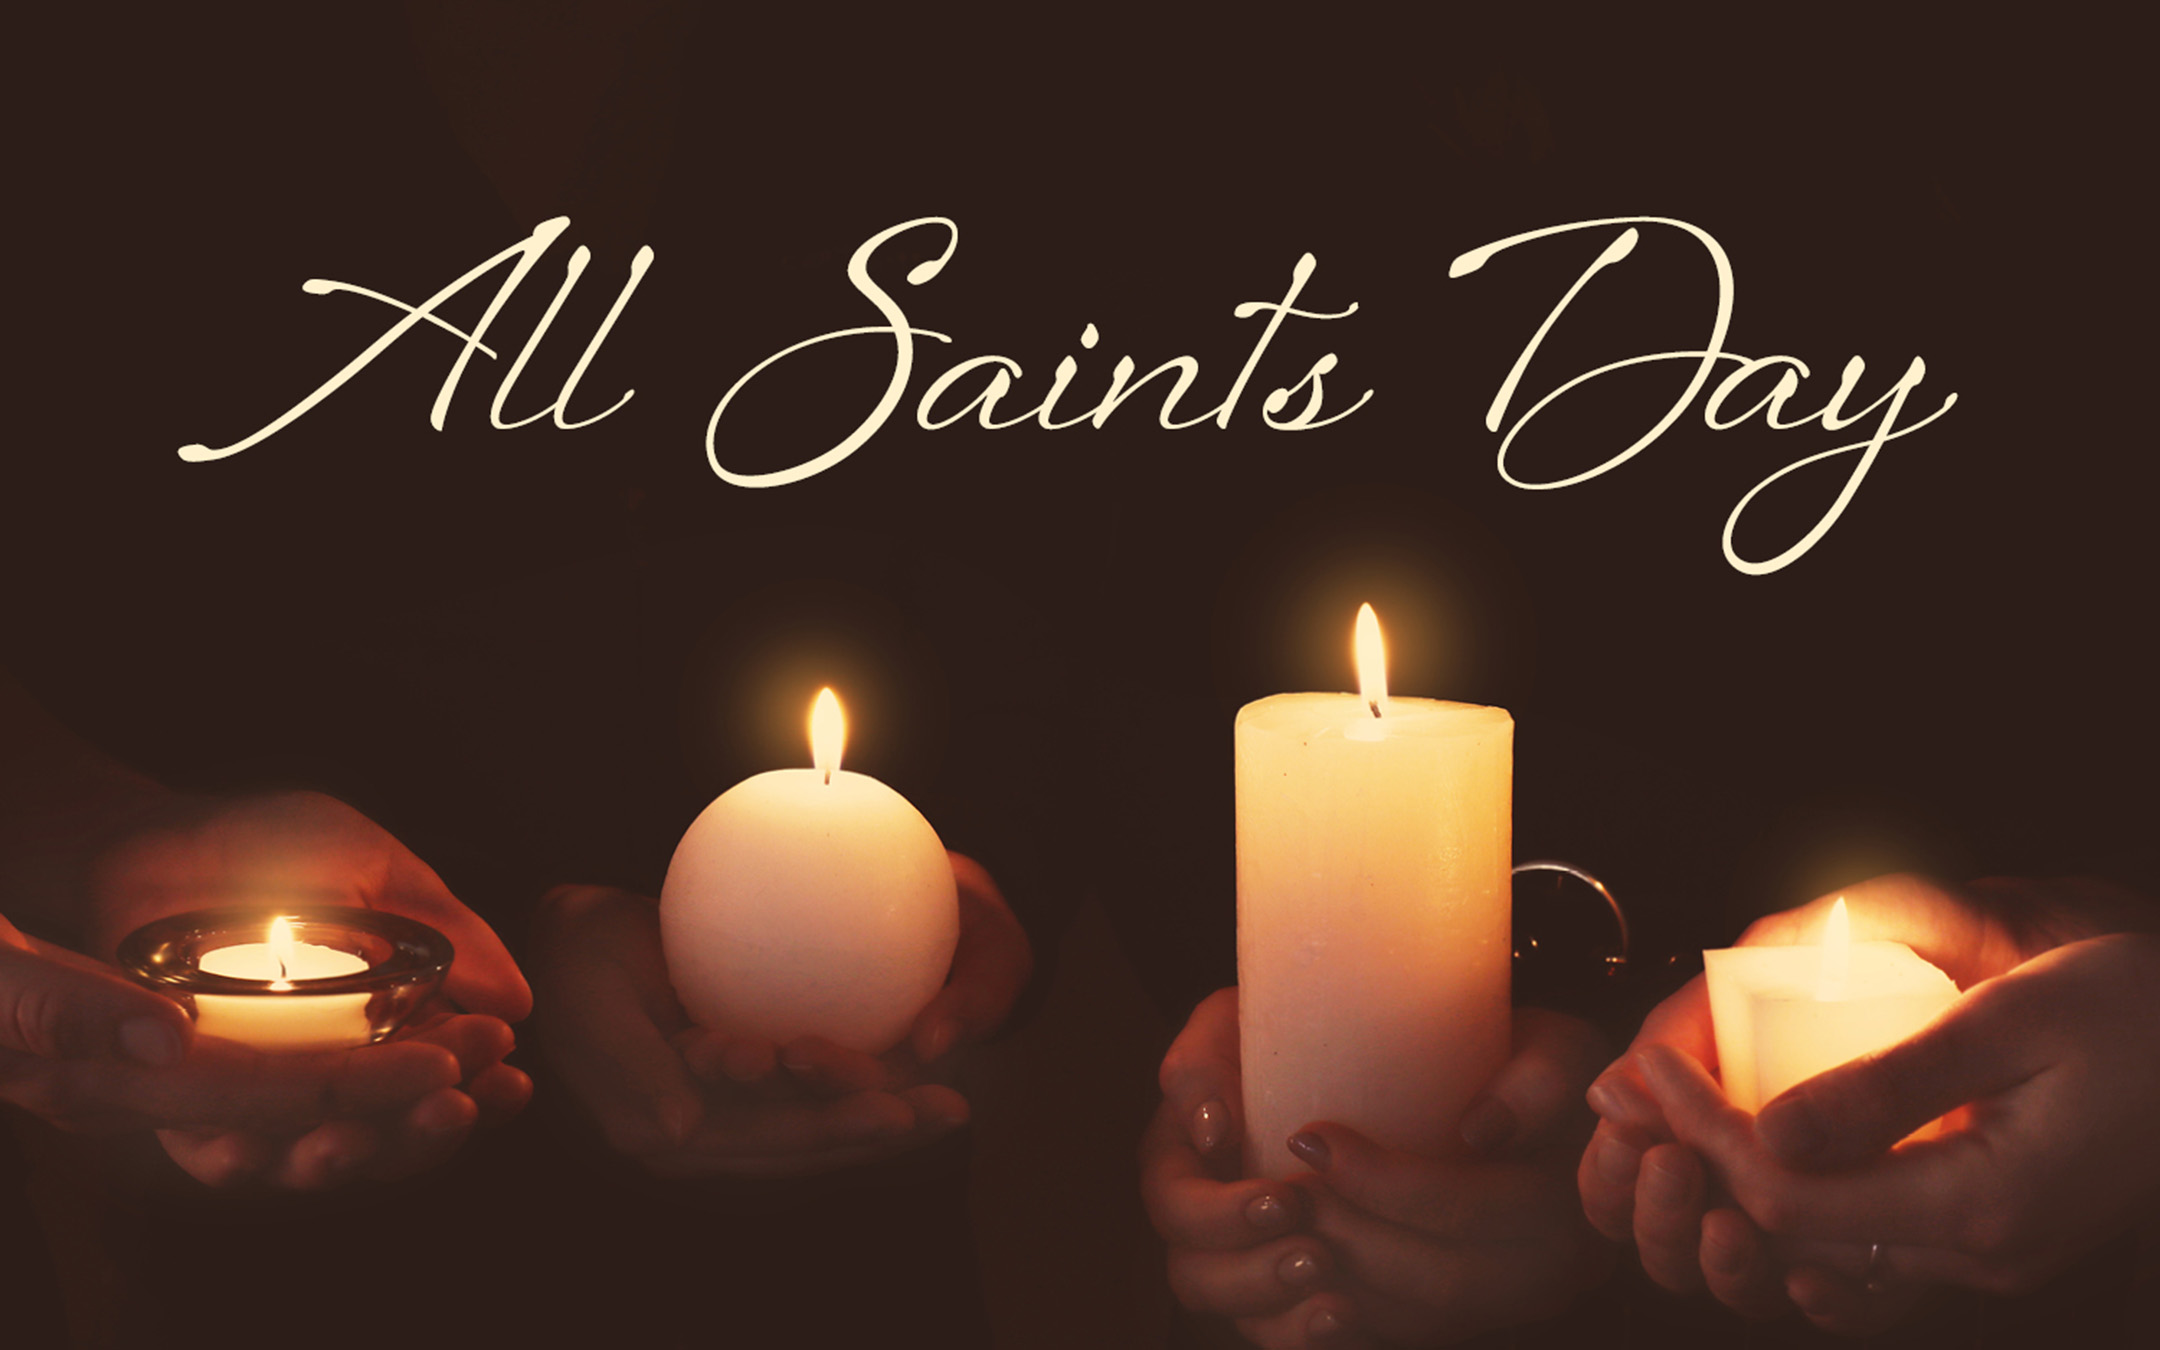 All Souls' day 2020 All Souls' Day 2020: History, tradition